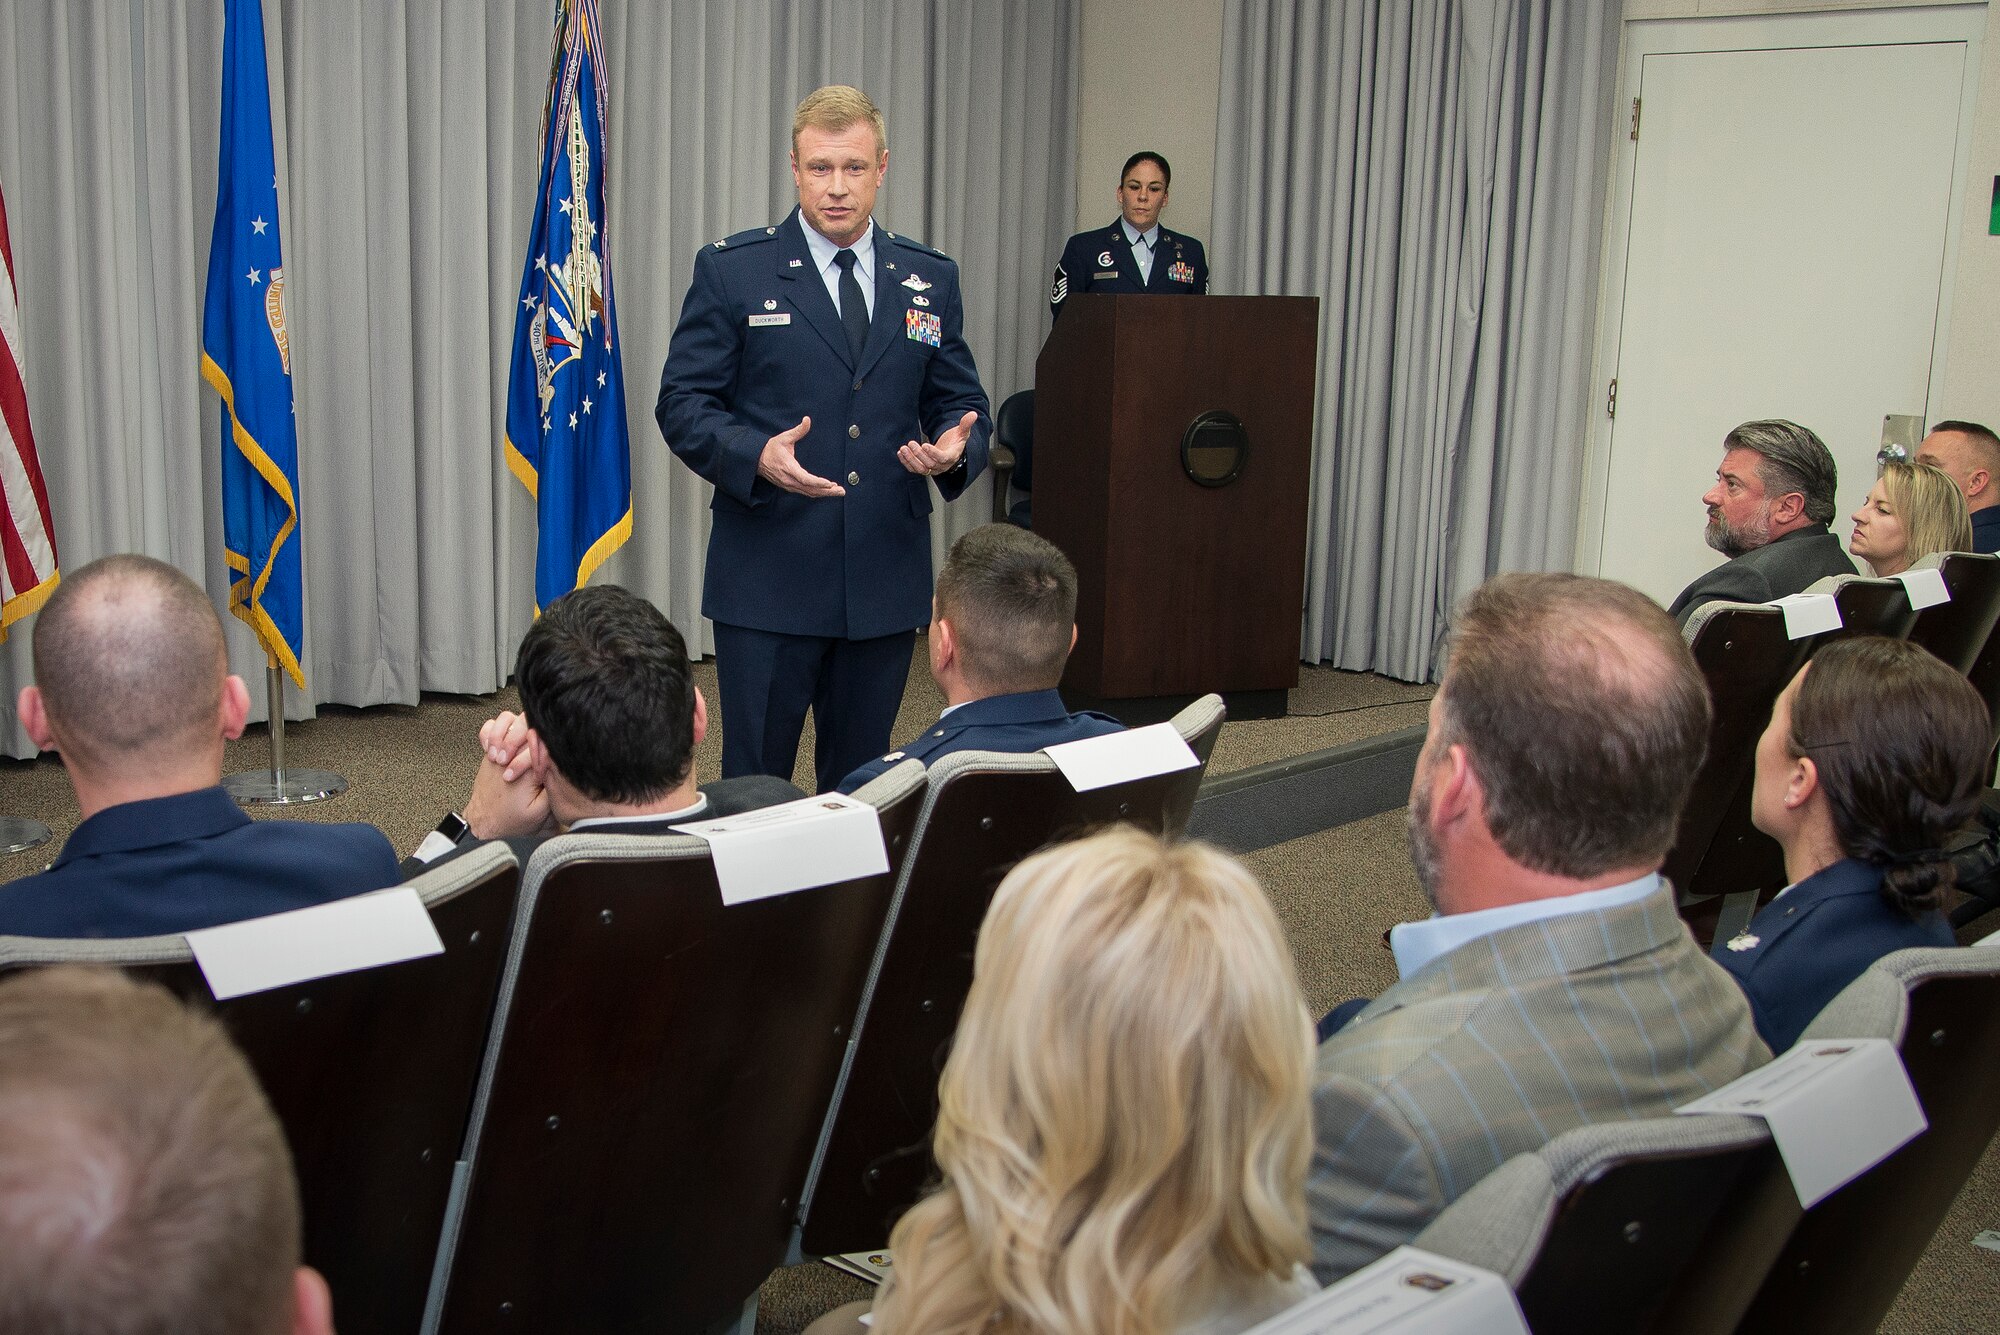 340th Flying Training Group Commander Col. Allen Duckworth welcomes distinguished visitors to the Feb. 1 honorary commander induction ceremony held at Joint Base San Antonio-Randolph,
Texas. (U.S. Air Force photo by Sean Worrell)